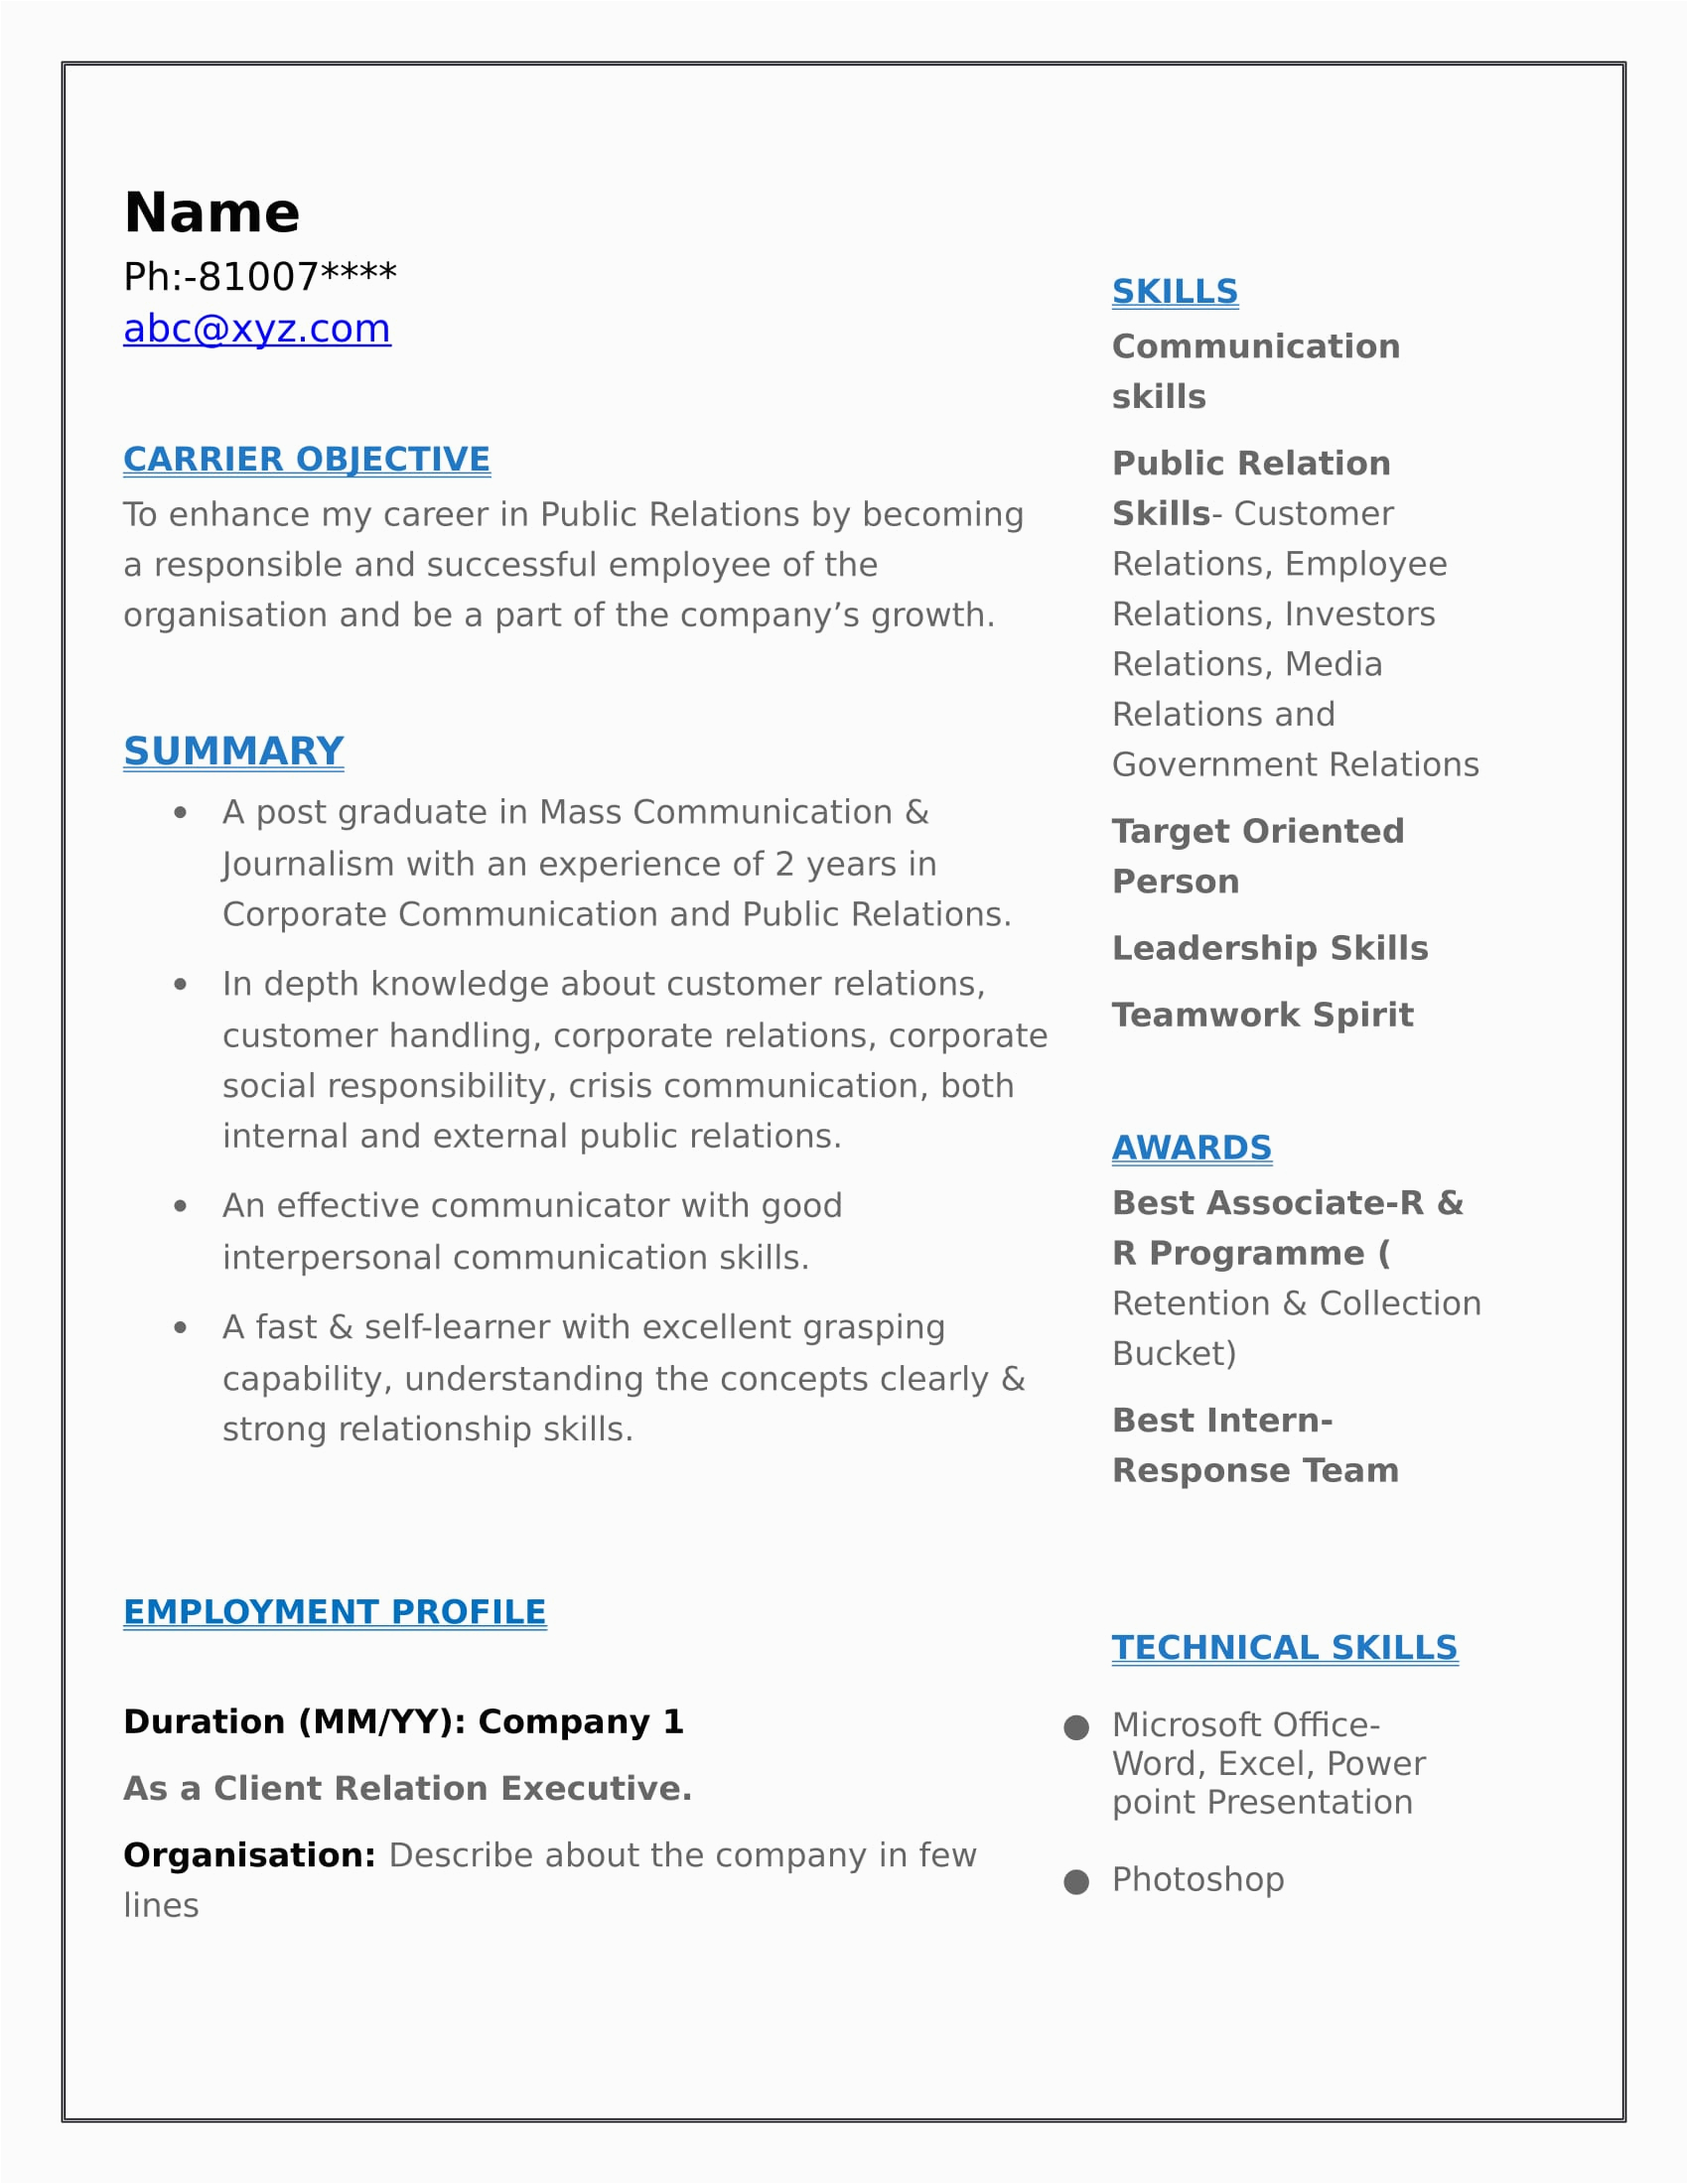 Sample Resume for Freshers In Media Jobs Resume Templates for Mass Munication Freshers Download Free